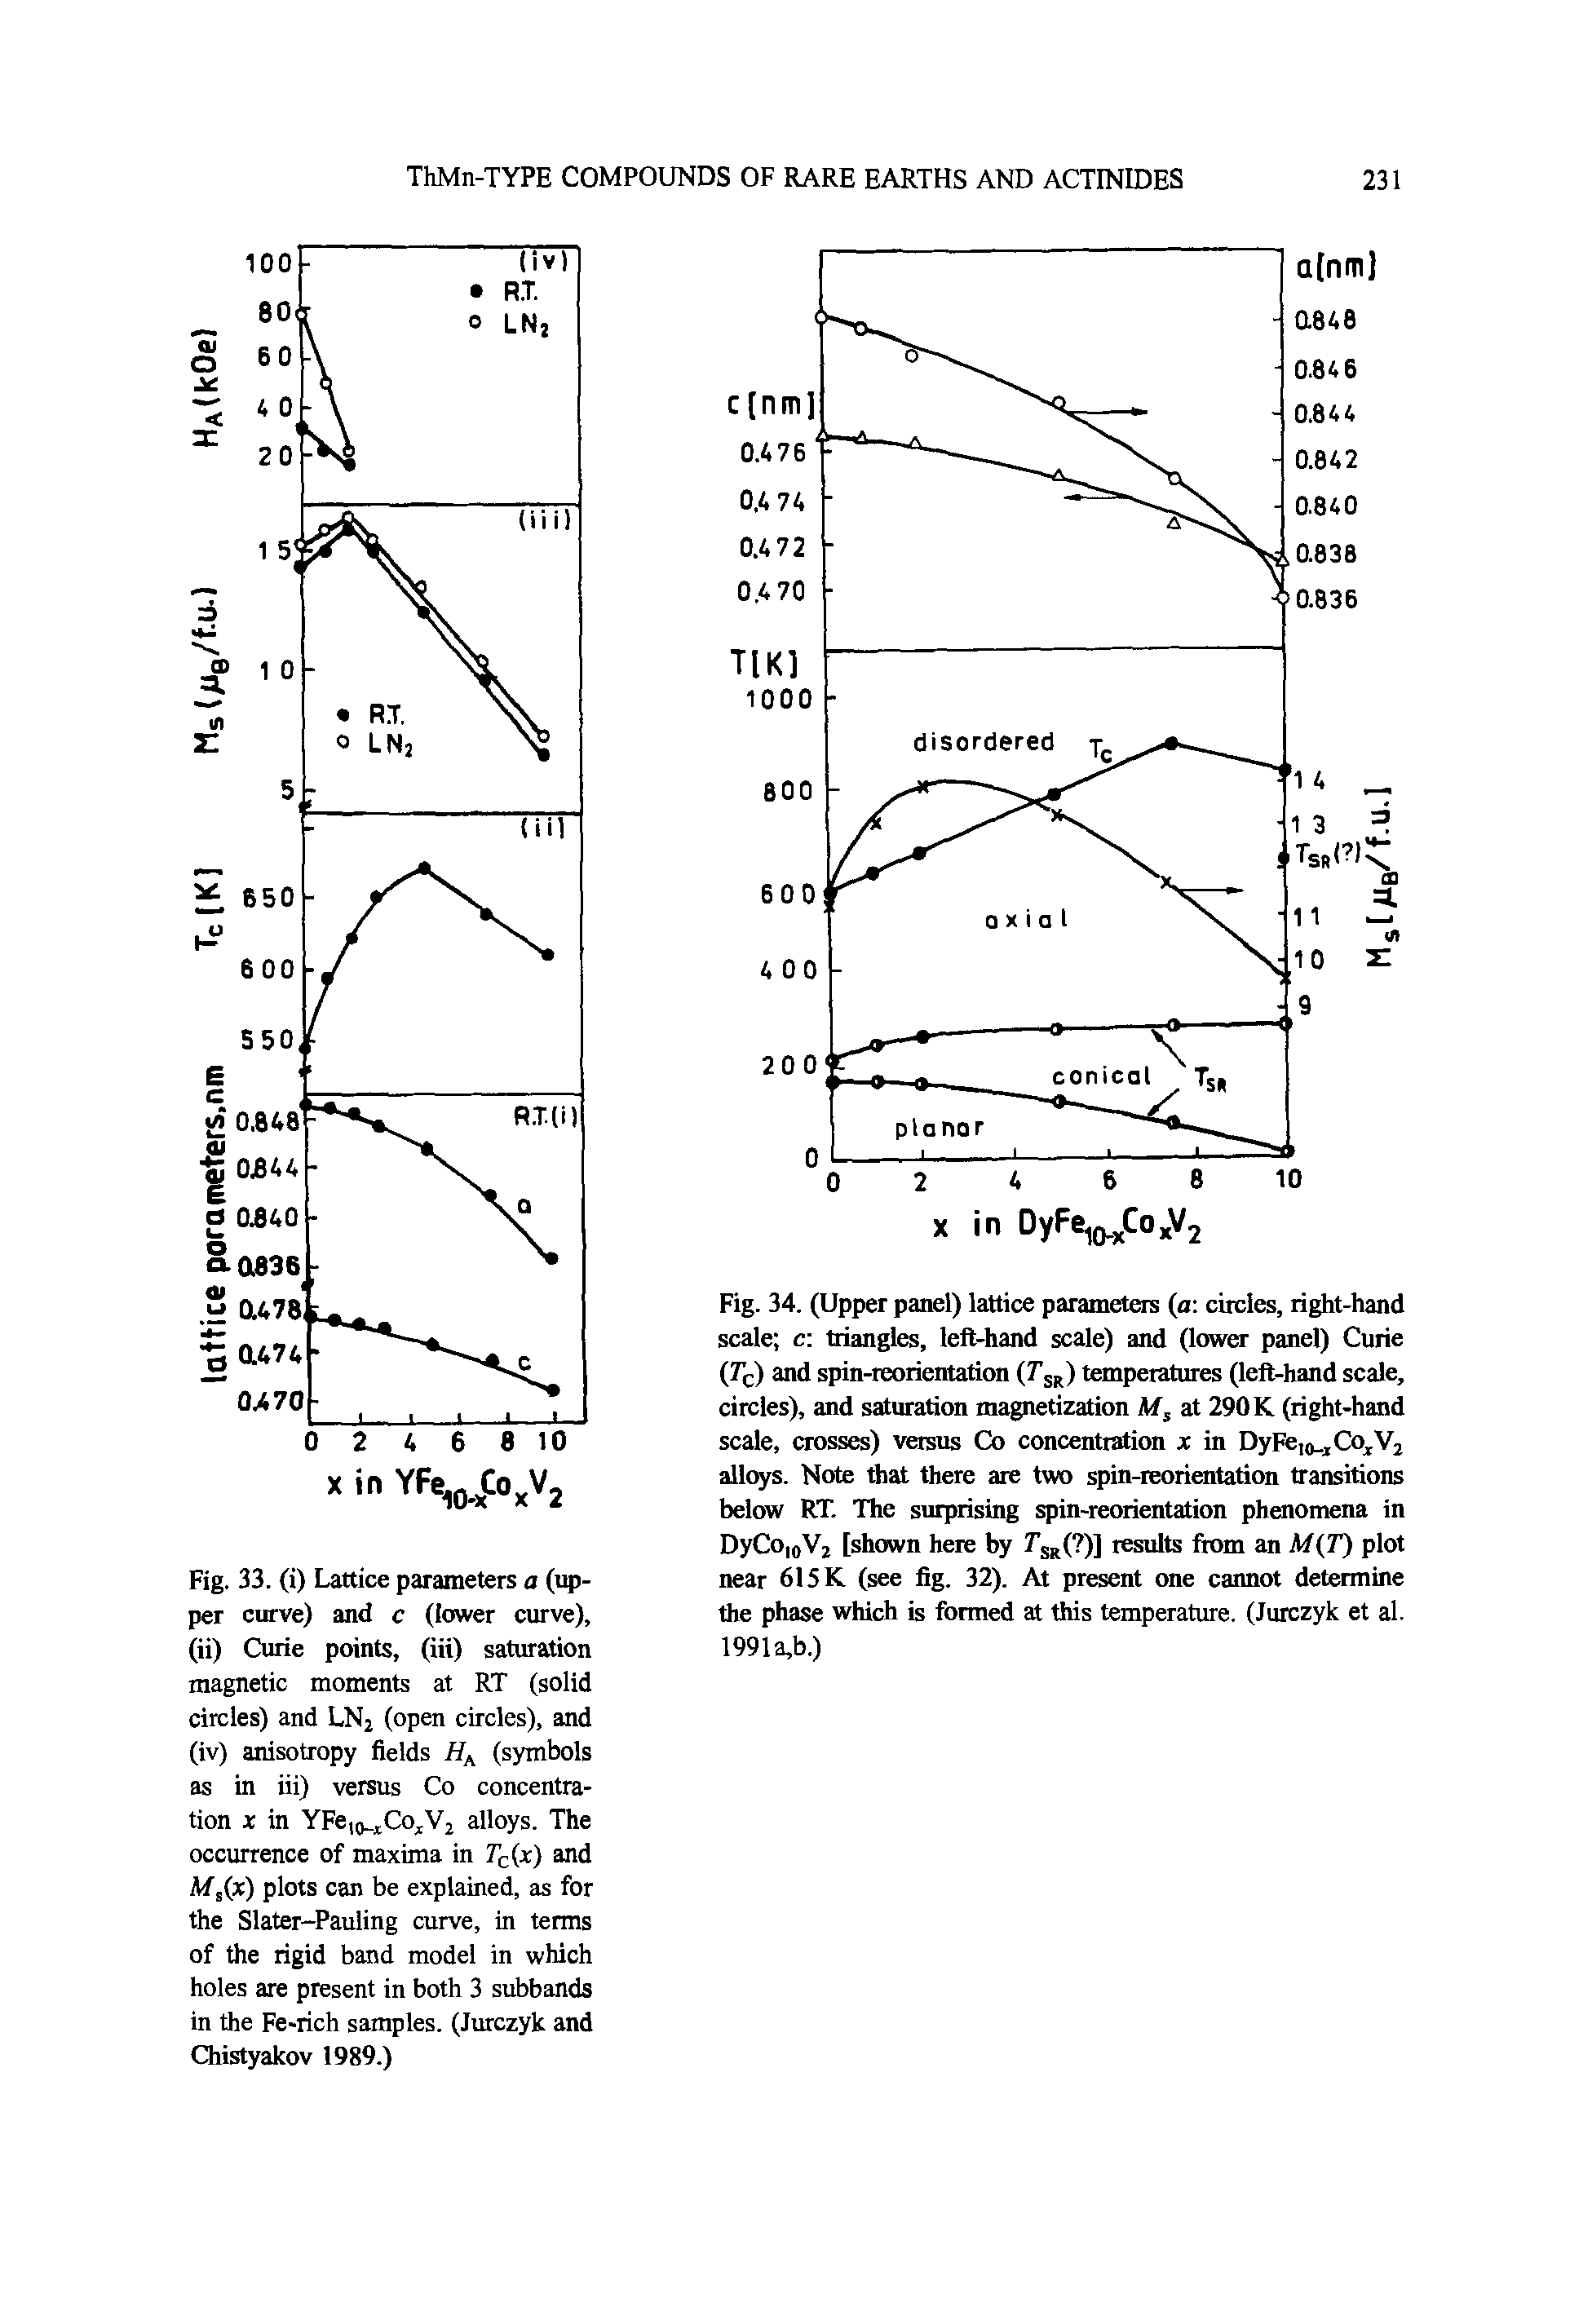 Fig. 34. (Upper panel) lattice parameters (a circles, right-hand scale c triangles, left-hand scale) and (lower panel) Curie (Tq) and spin-reorientation (Tgg) temperatures (left-hand scale, circles), and saturation trragnetization M, at 290 K (right-hand scale, crosses) versus Co concentration x in DyFeu Co Vj alloys. Note that there are two spin-reorientation transitions below RT. The surprisirtg spin-reorientation phenorttena in DyCO oV2 [shown here by 7 s ( )] results from an M(T) plot near 615 K (see fig. 32). At present one carmot determine the phase which is formed at this temperature. (Jurczyk et al. 1991a,b.)...